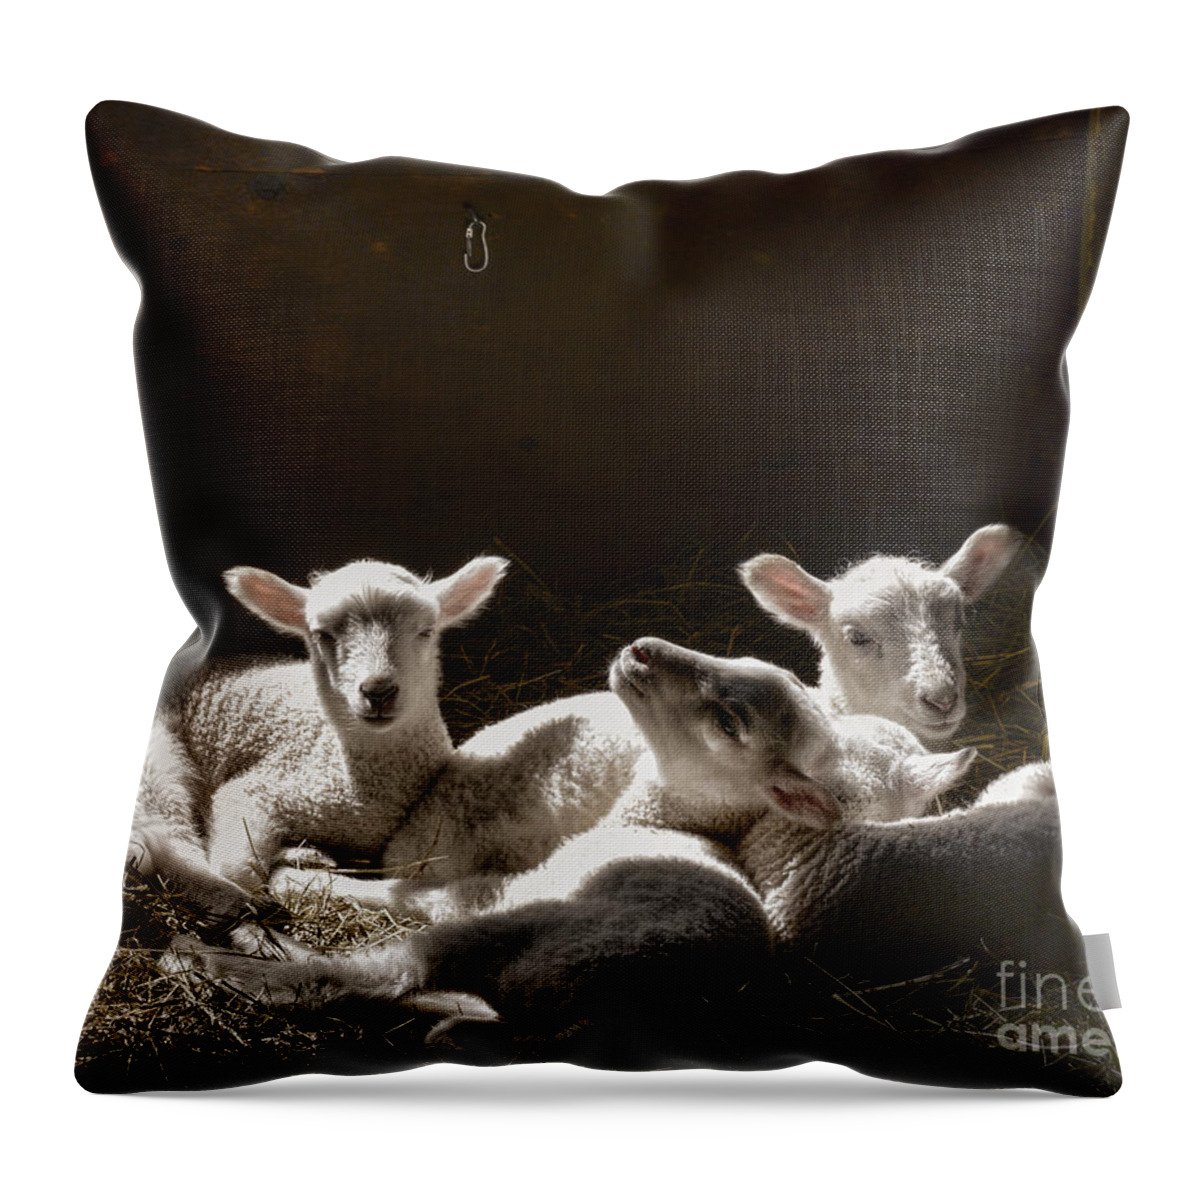 Lambs Throw Pillow featuring the photograph Four Lambs by Alana Ranney